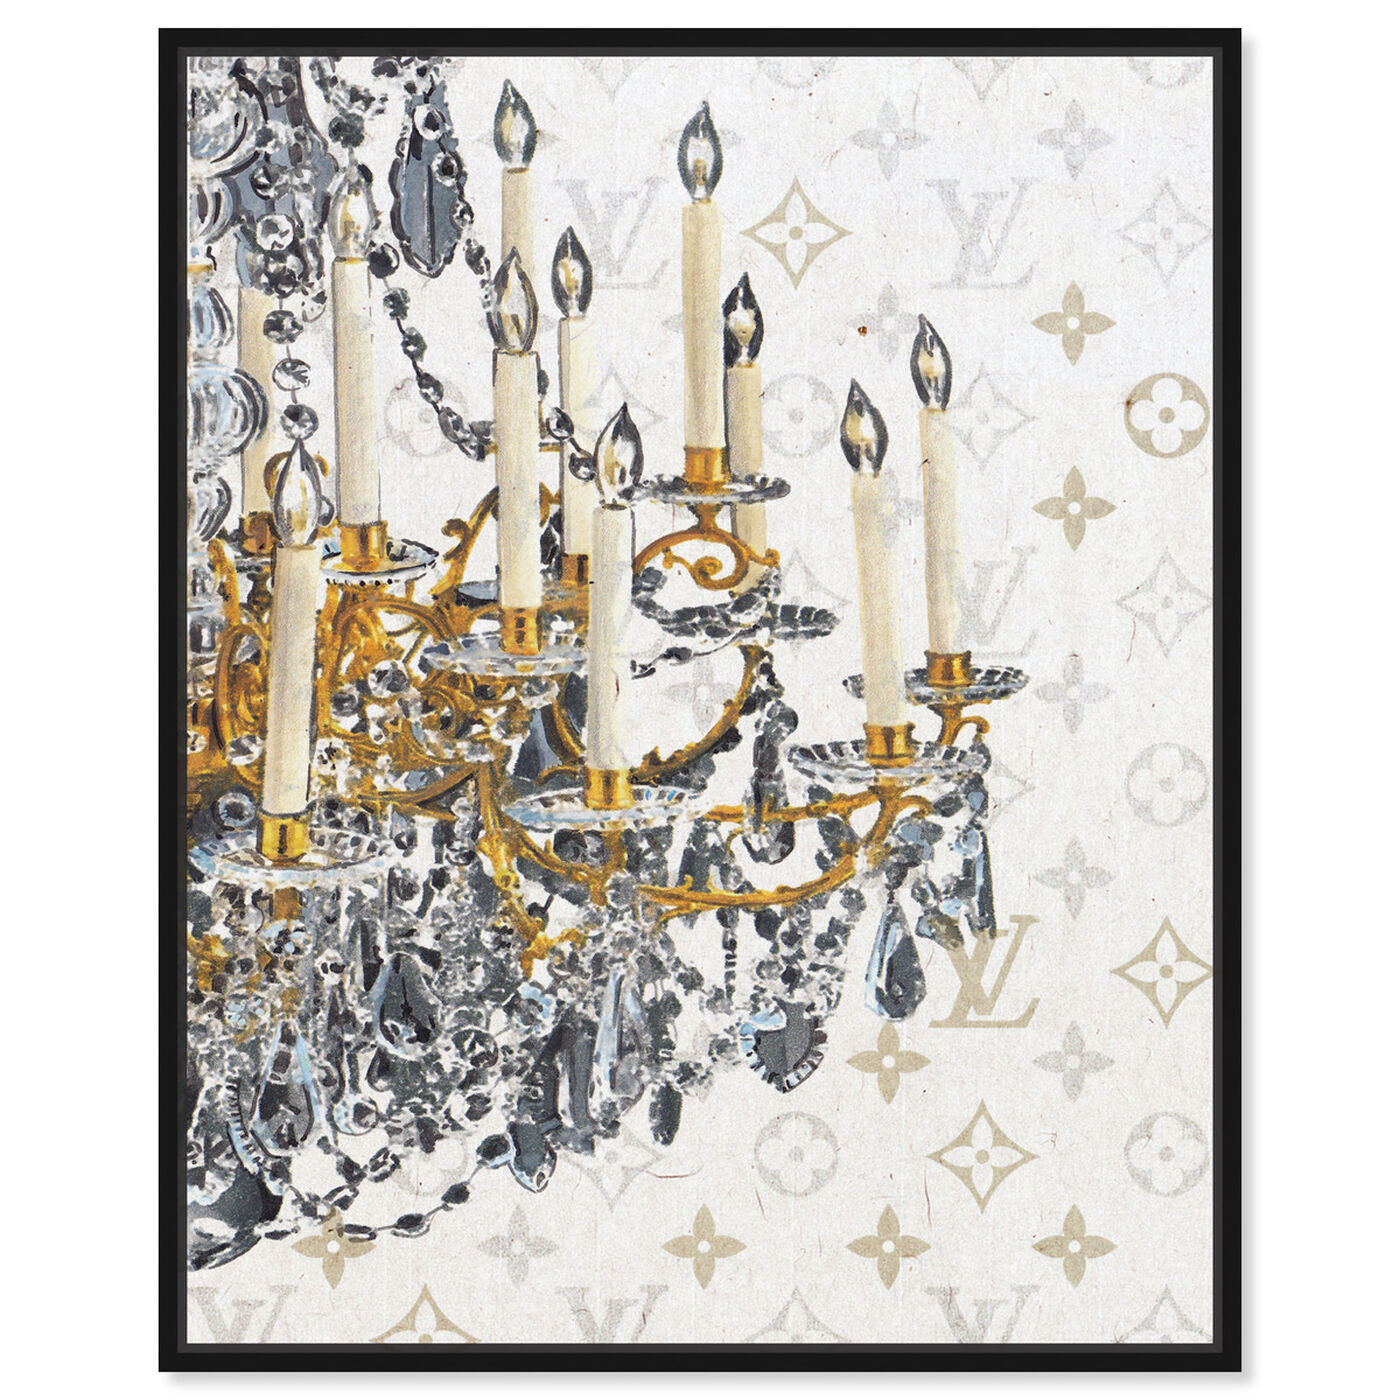 Front view of Fancy Light II featuring fashion and glam and chandeliers art.